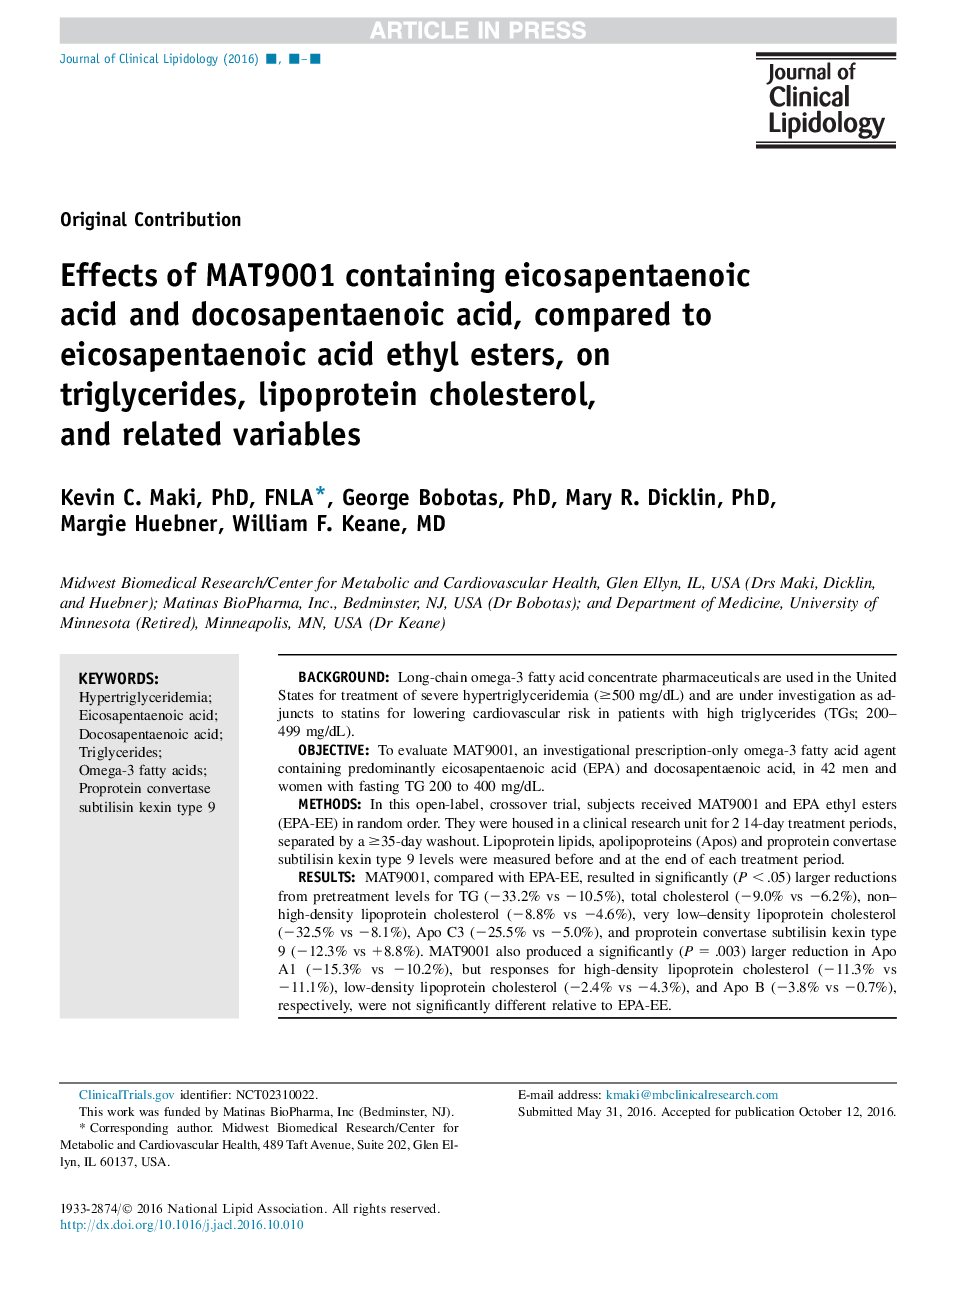 Effects of MAT9001 containing eicosapentaenoic acid and docosapentaenoic acid, compared to eicosapentaenoic acid ethyl esters, on triglycerides, lipoprotein cholesterol, and related variables